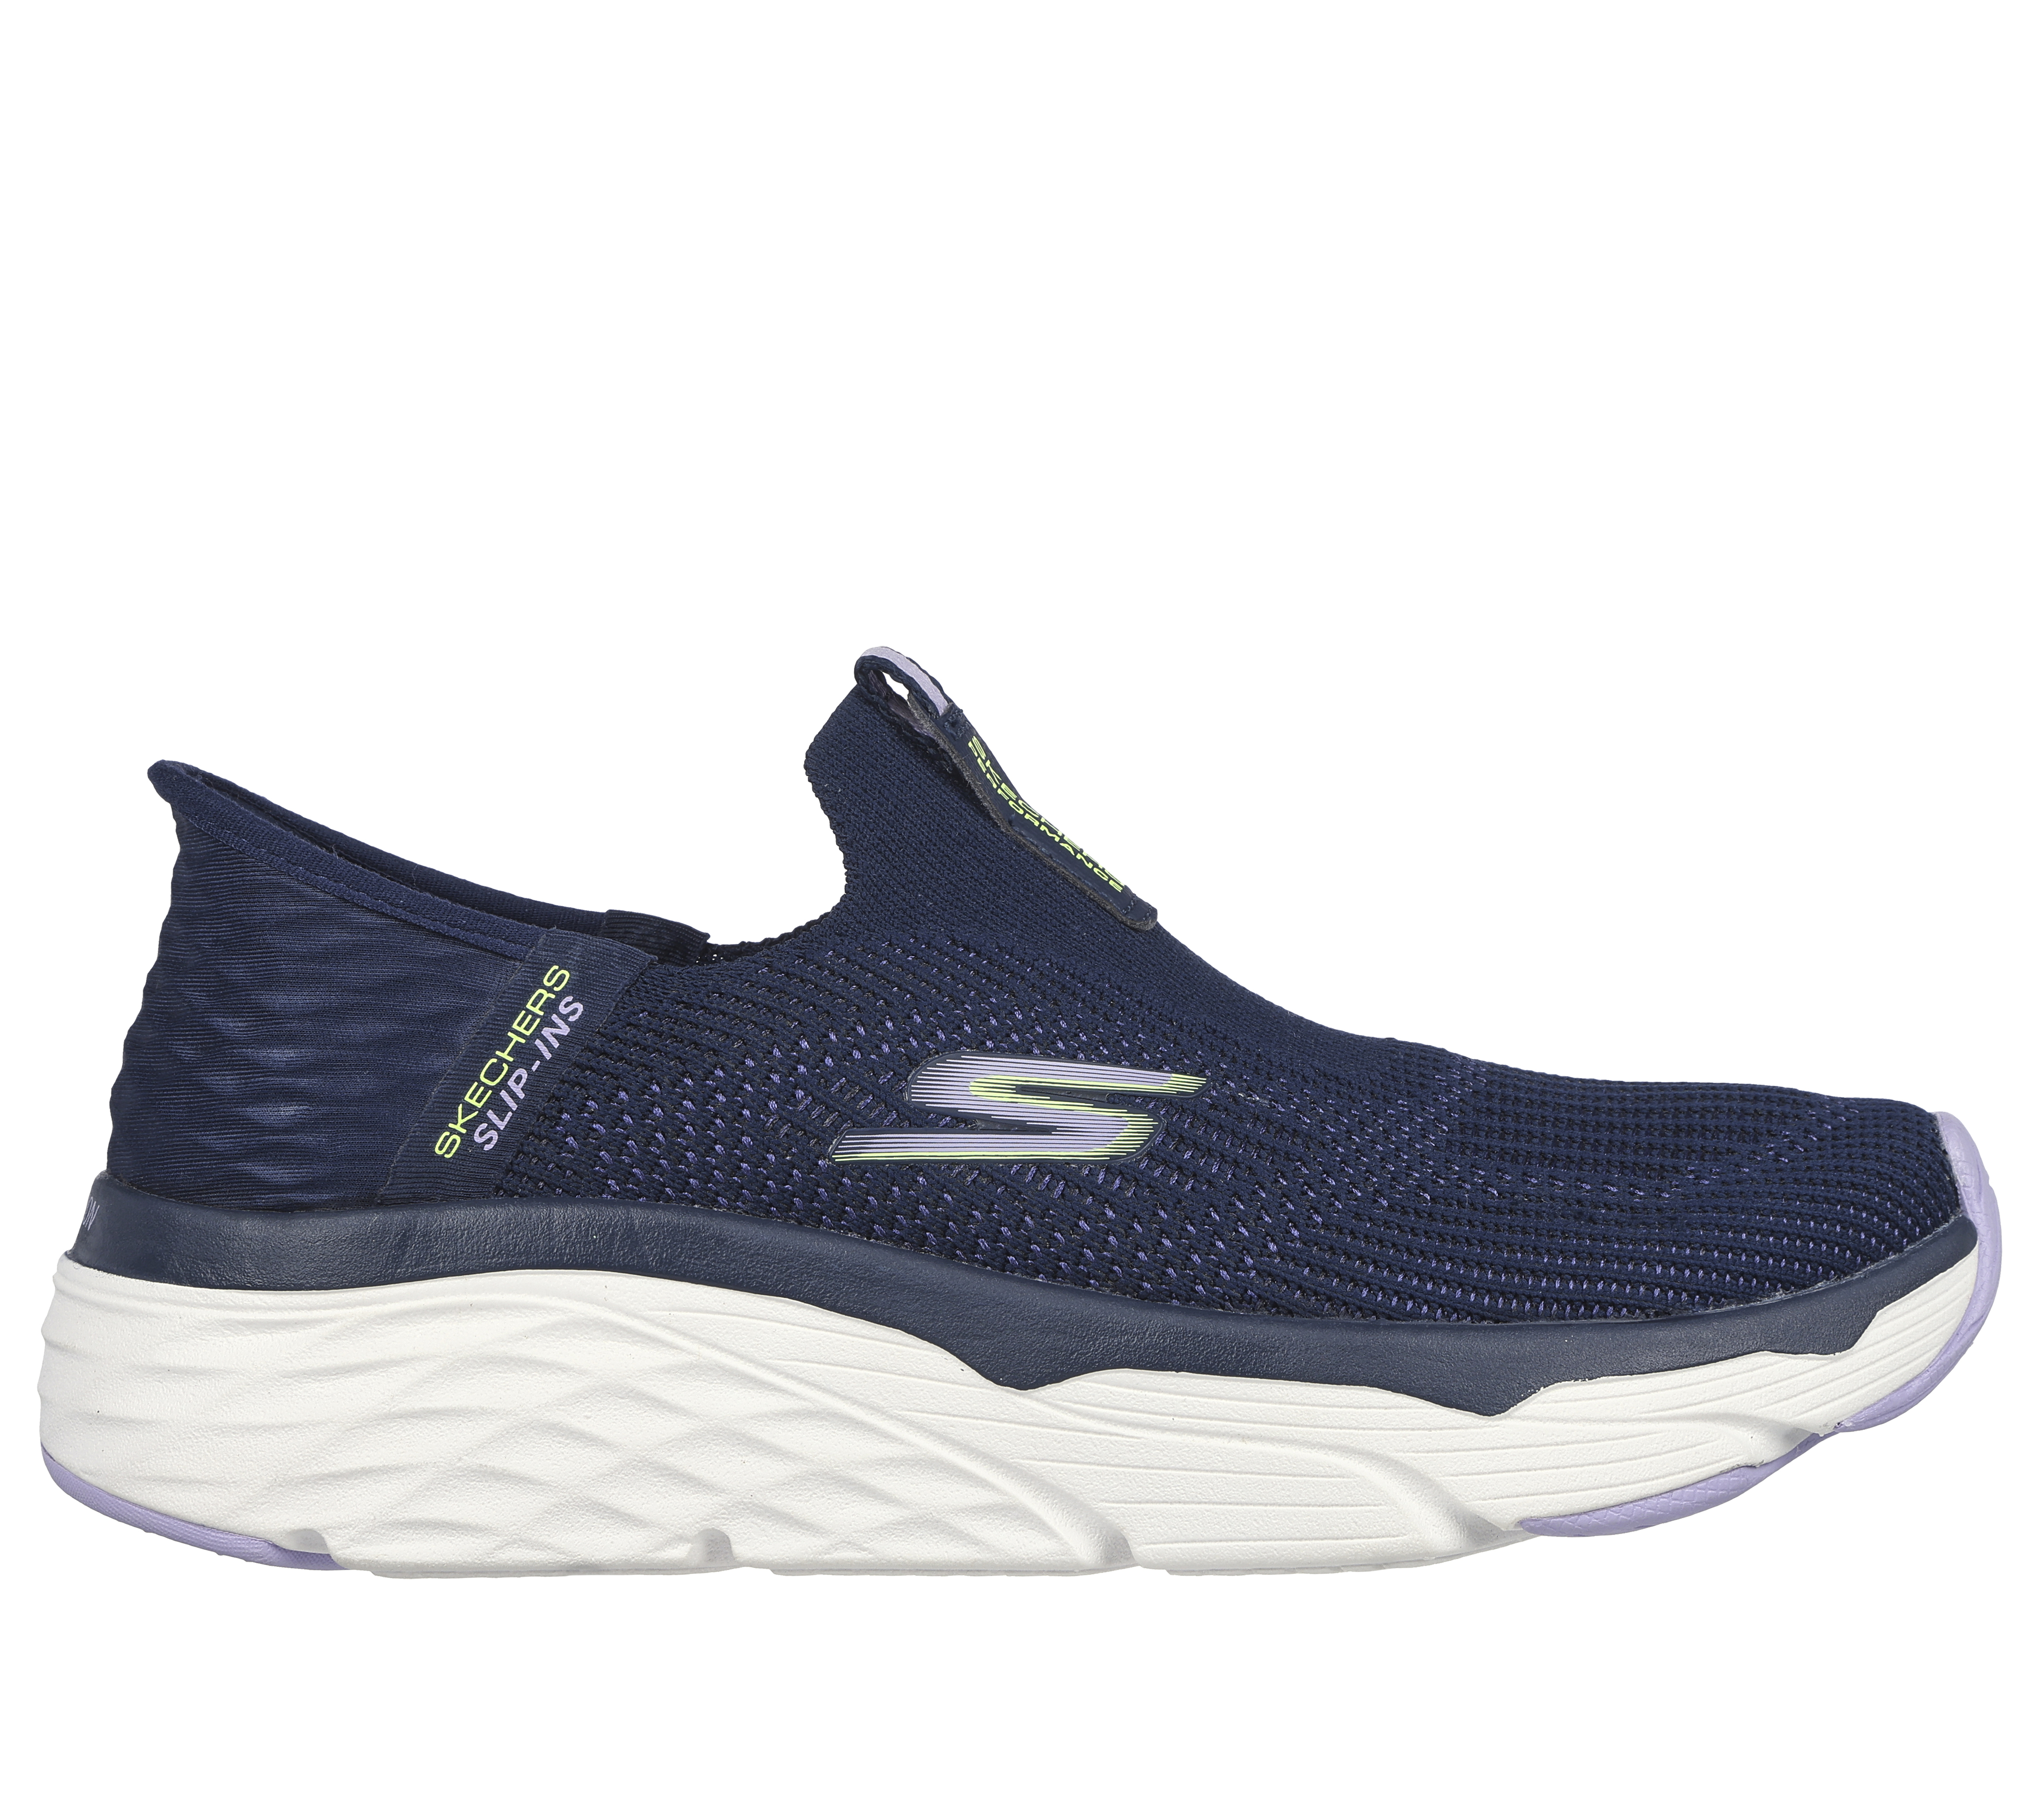 Skechers Fashion Fit Up A Level Womens Slip On Sneakers 